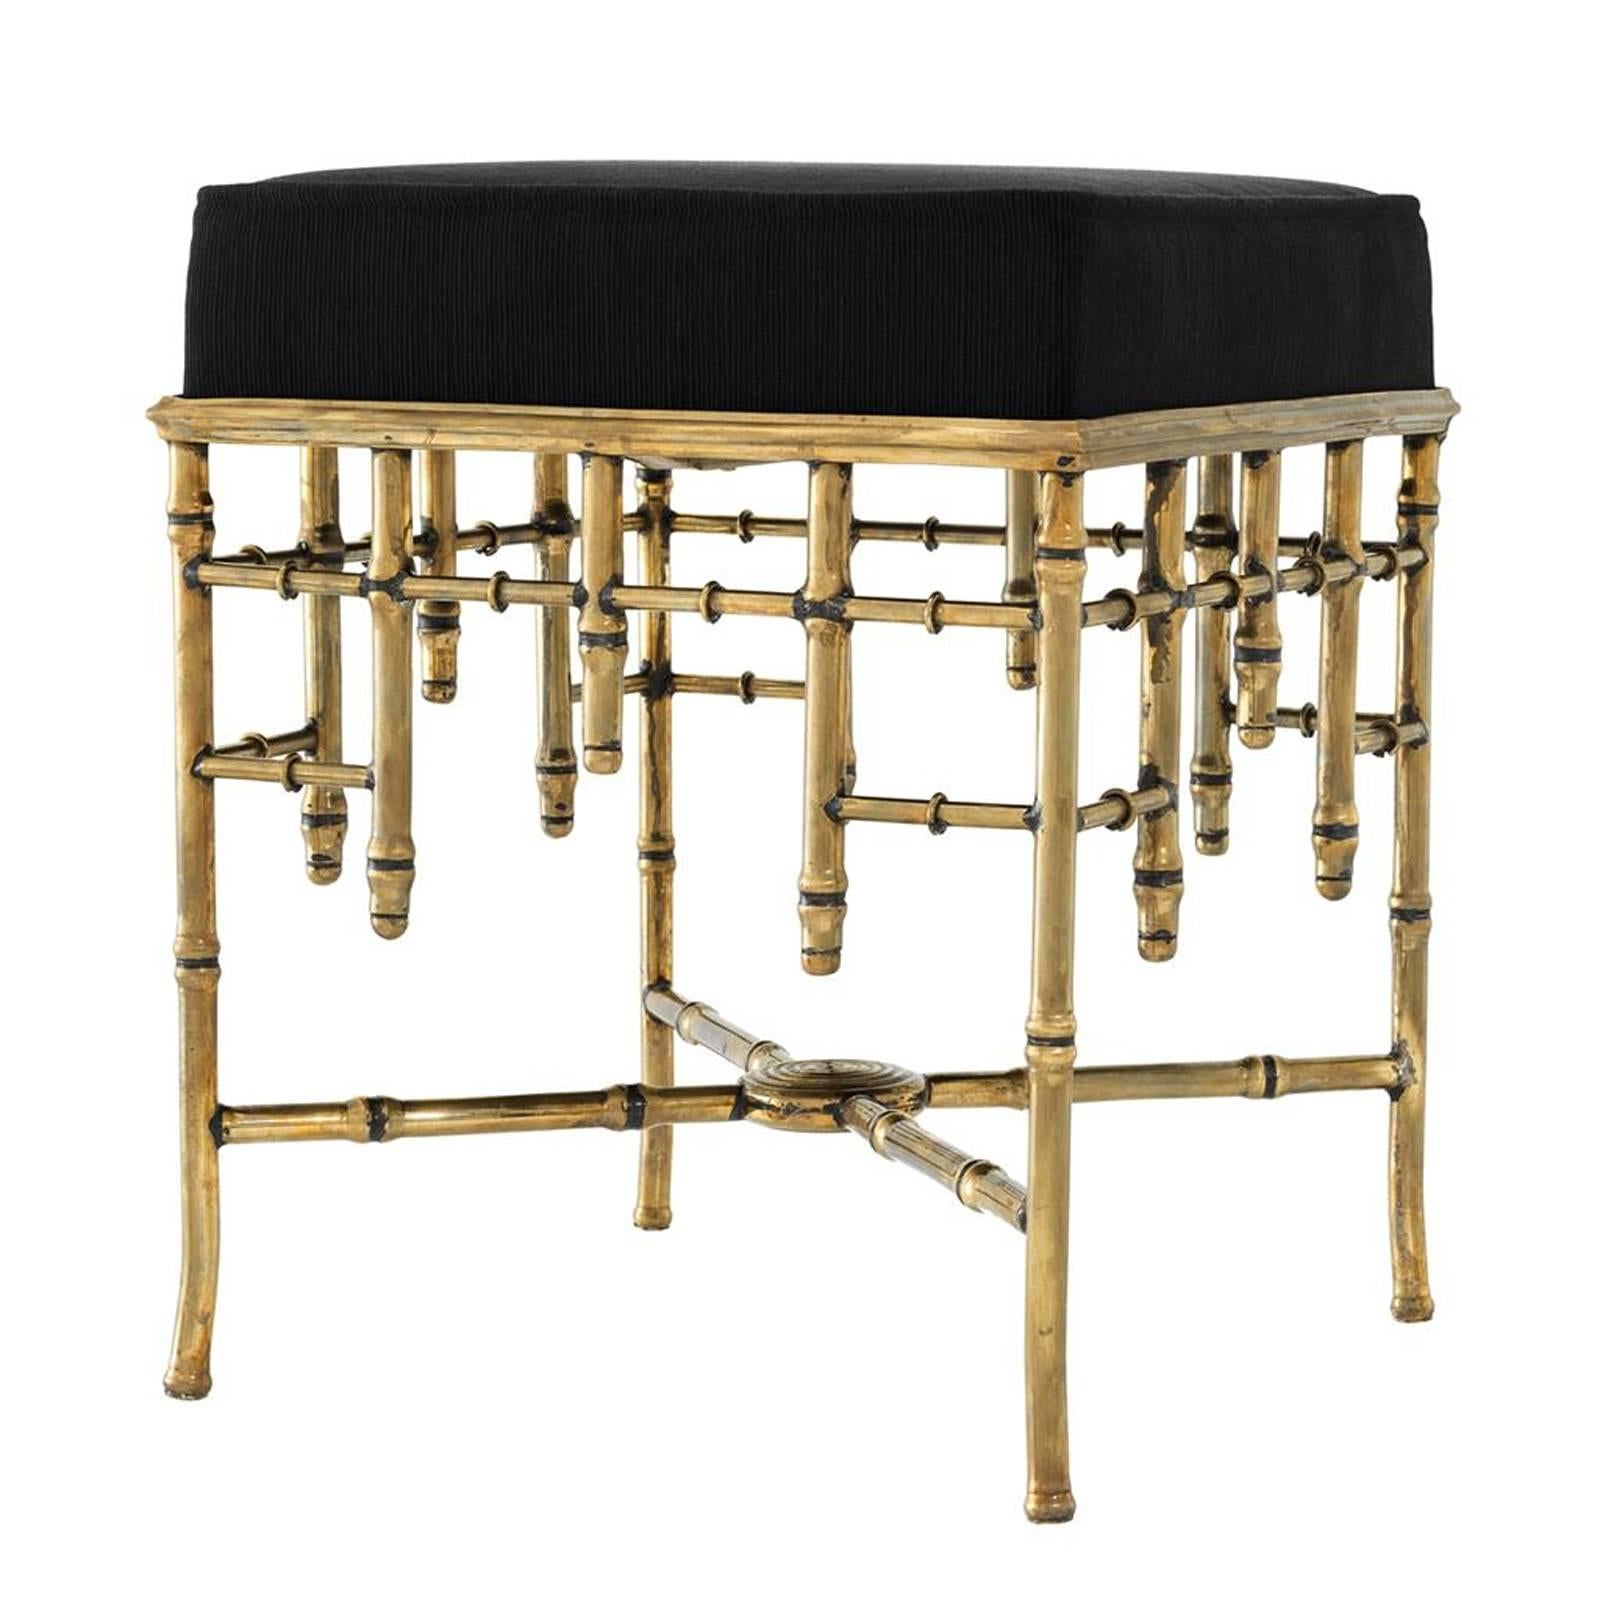 Indian Reed Square in Vintage Brass Finish and Black Velvet Seat